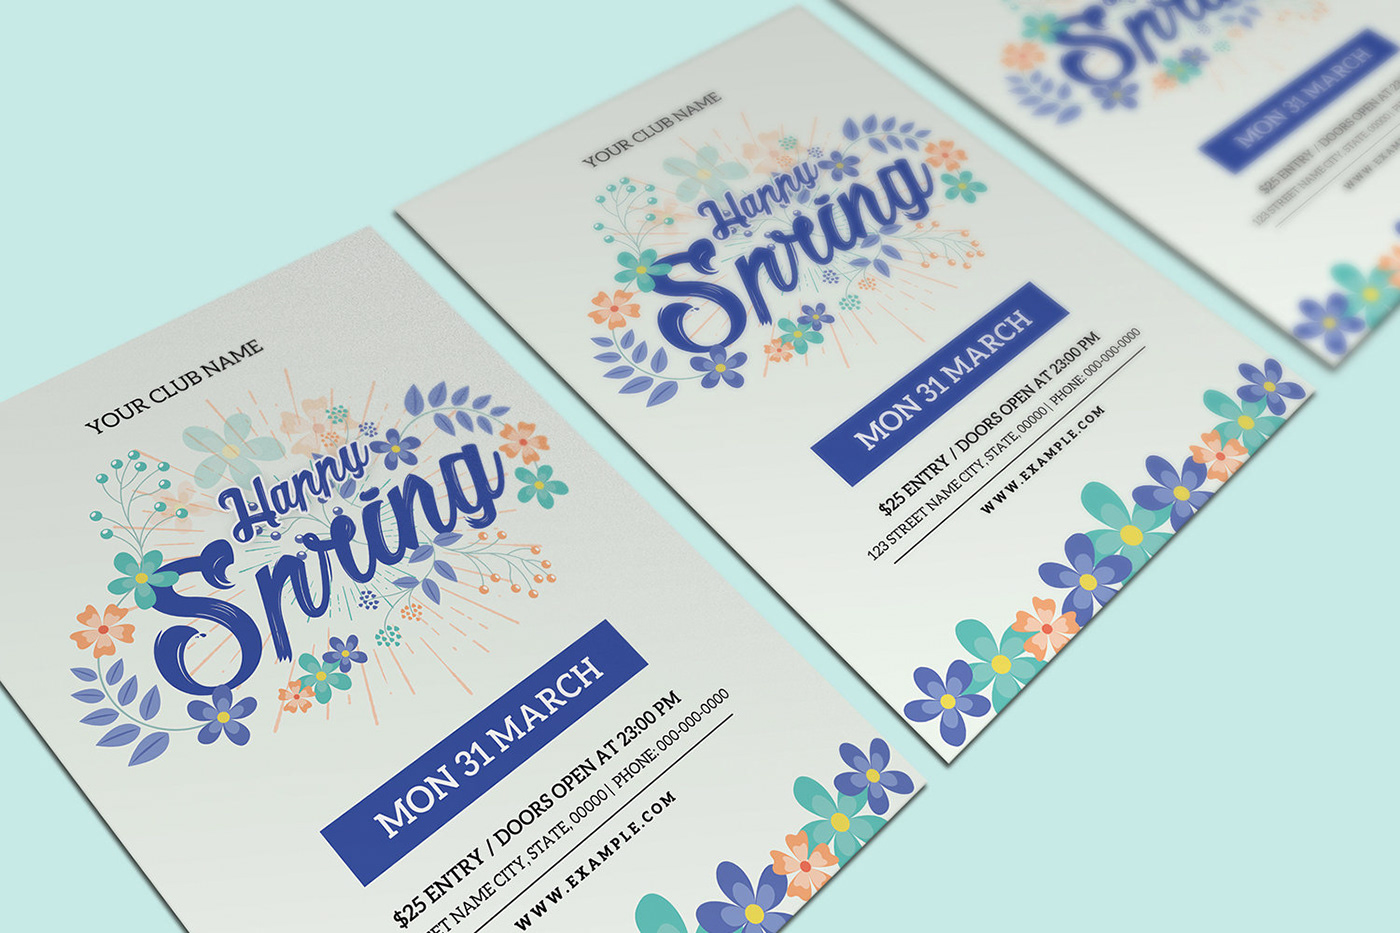 spring festival Invitation Flyer ms word party flyer photoshop template spring festival spring flyer Spring Party spring poster